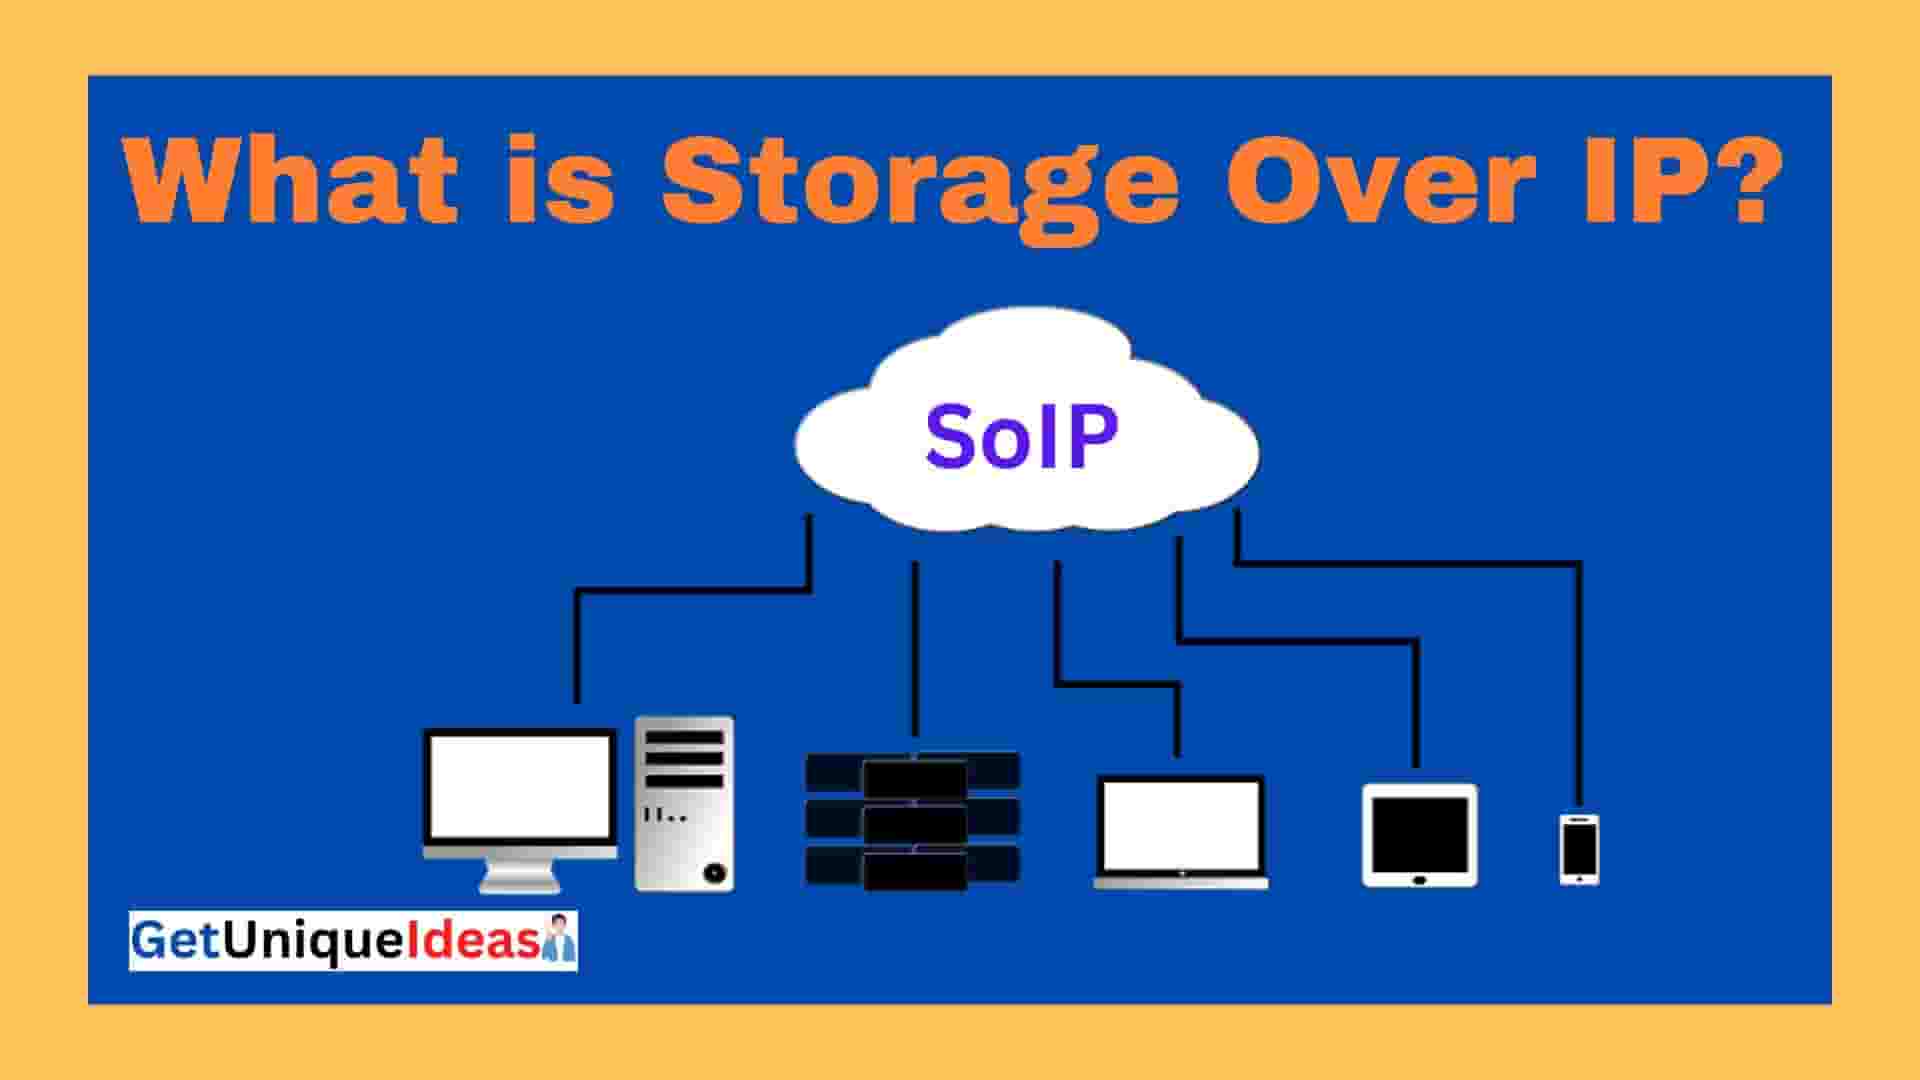 What is Storage Over IP?